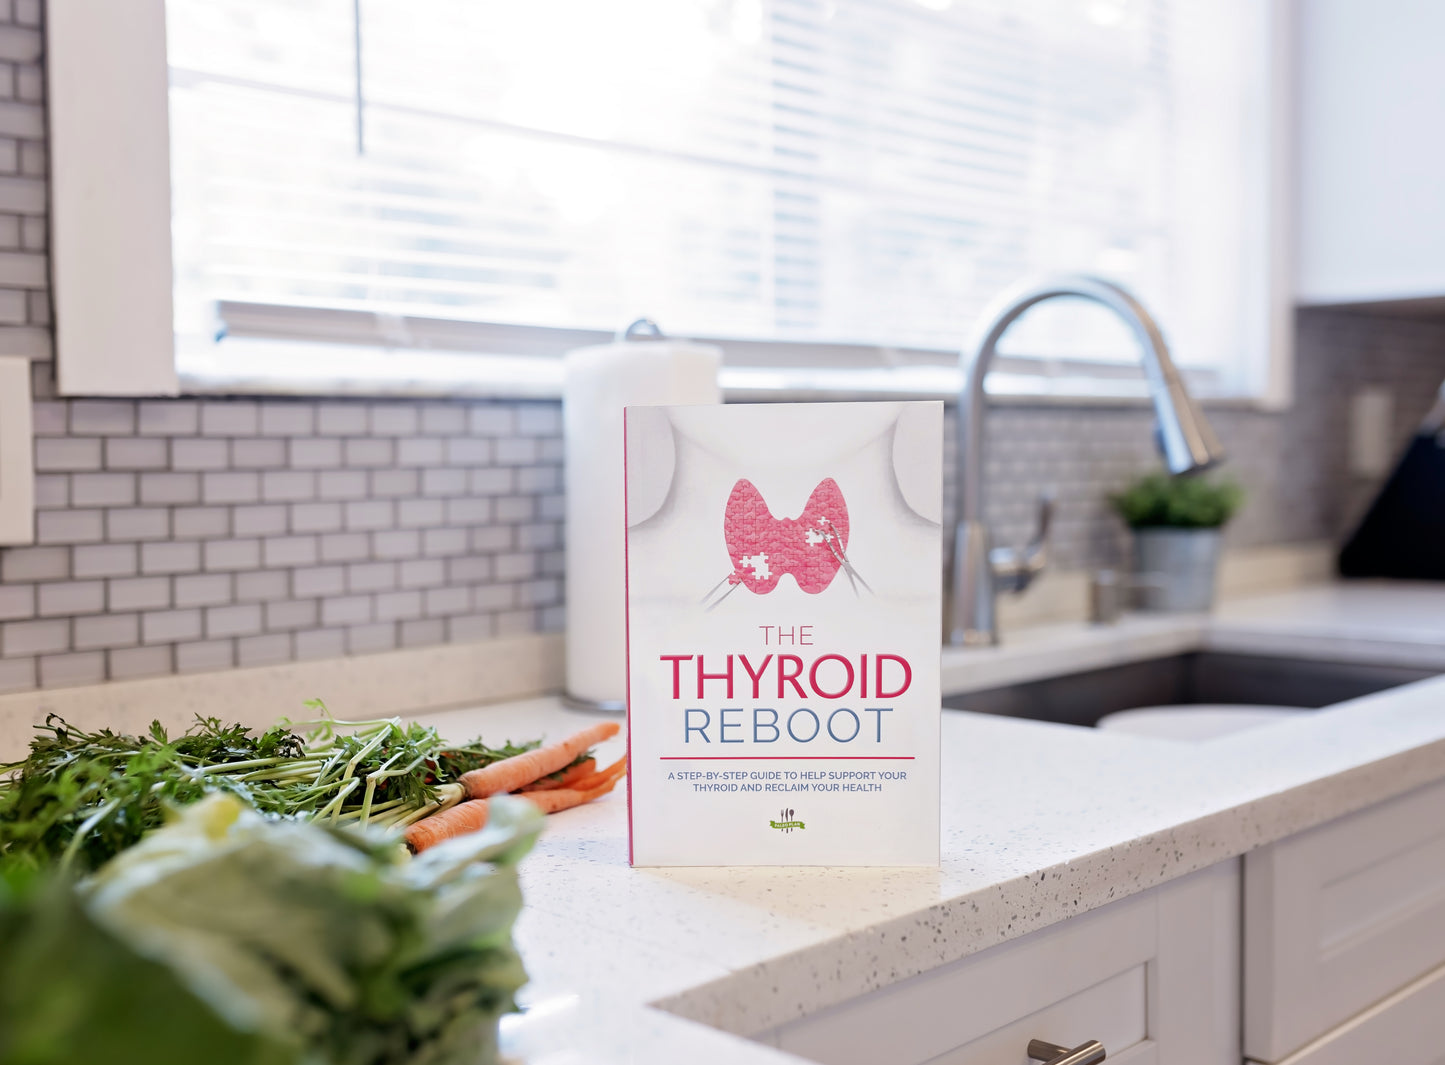 The Thyroid Reboot book stands on a kitchen counter. Vegetables can be seen in the background.